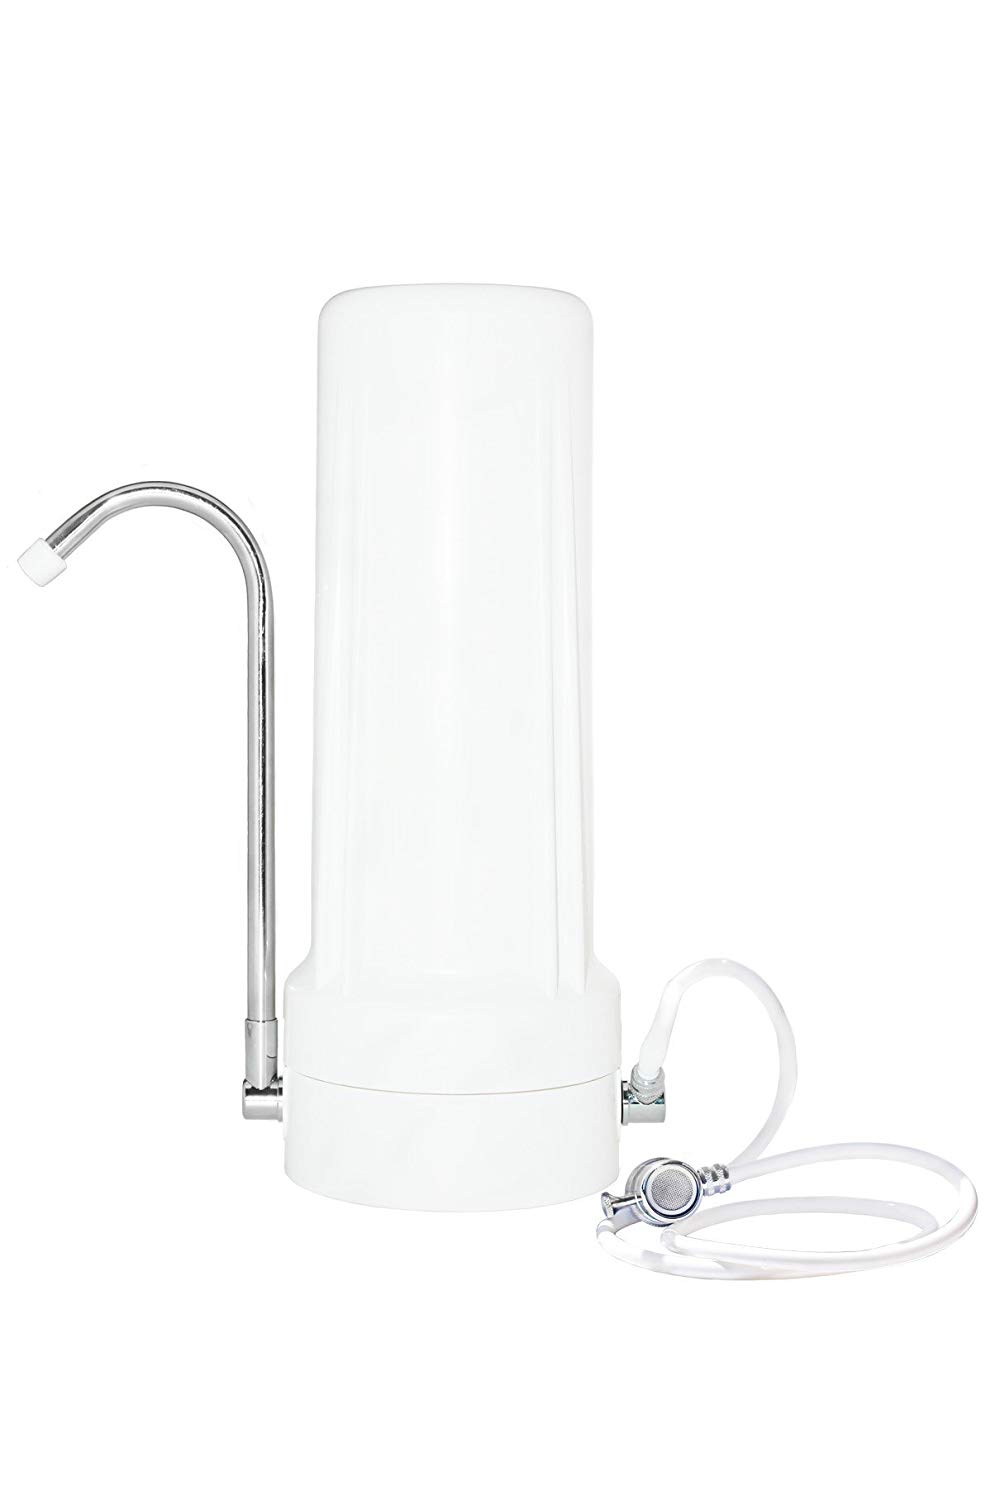 10-Stage Water Filter